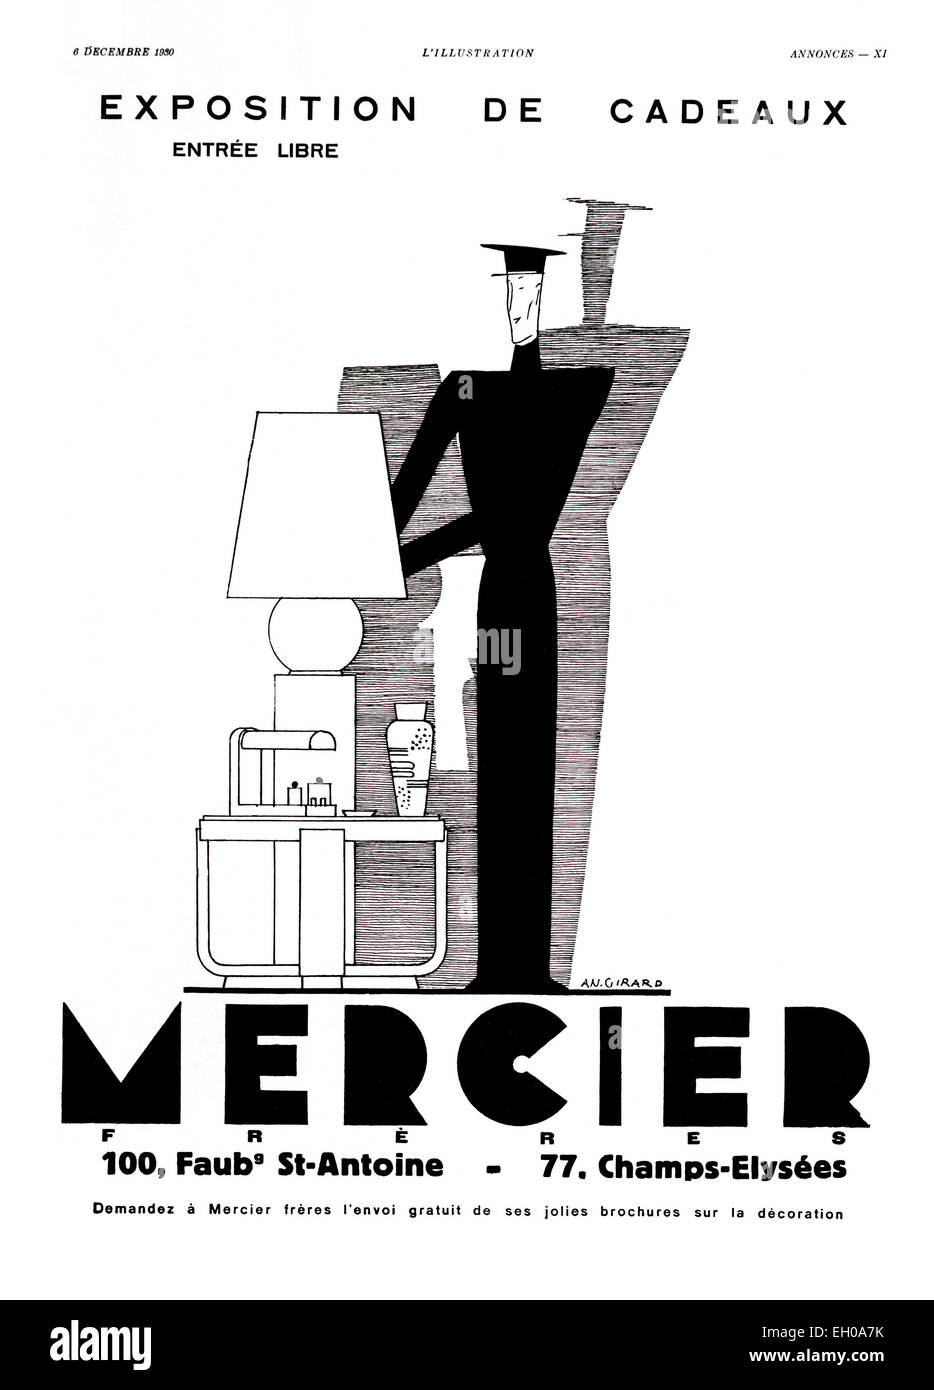 1930 advert for “Mercier” gift shop from French “L’Illustration” magazine. Stock Photo